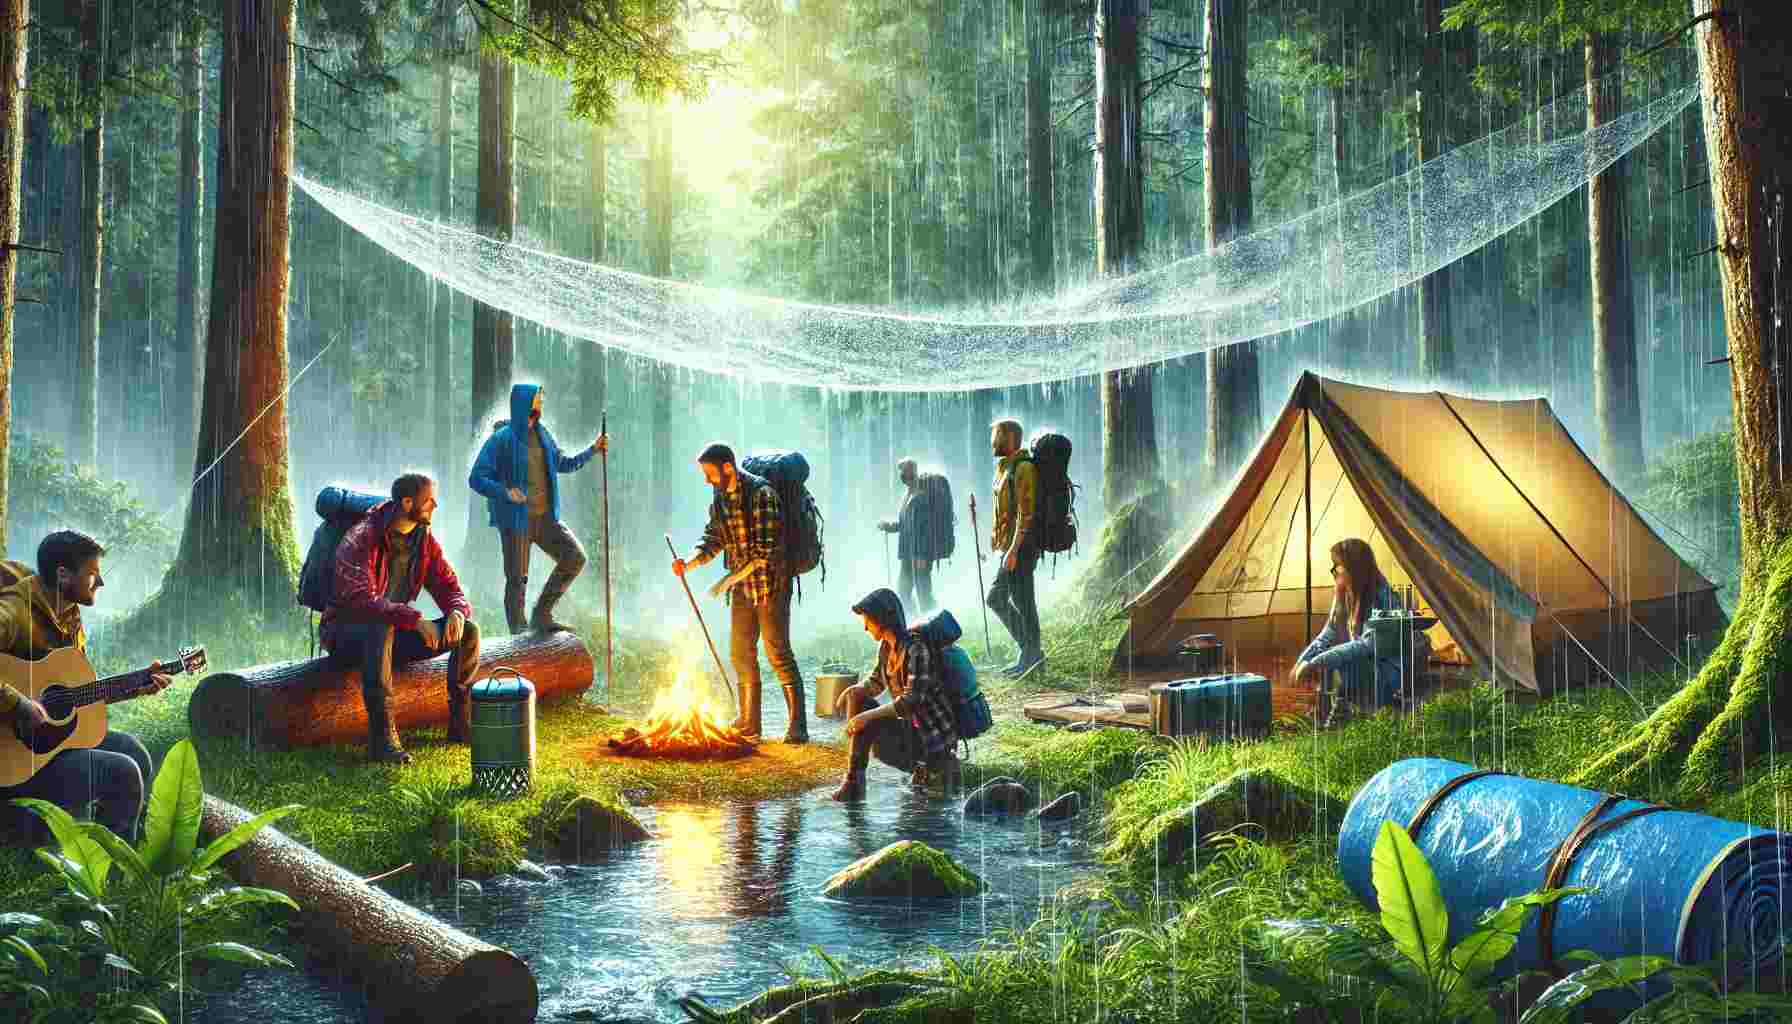 A group of campers in a picturesque forest setting during a light rain. They are setting up a waterproof tent and using tarps for additional protection. The campers are dressed in rain gear and appear happy and prepared, with a serene, misty backdrop. A cozy campfire is under a large tarp, creating a vibrant and inviting scene that captures the essence of a rainy camping adventure.